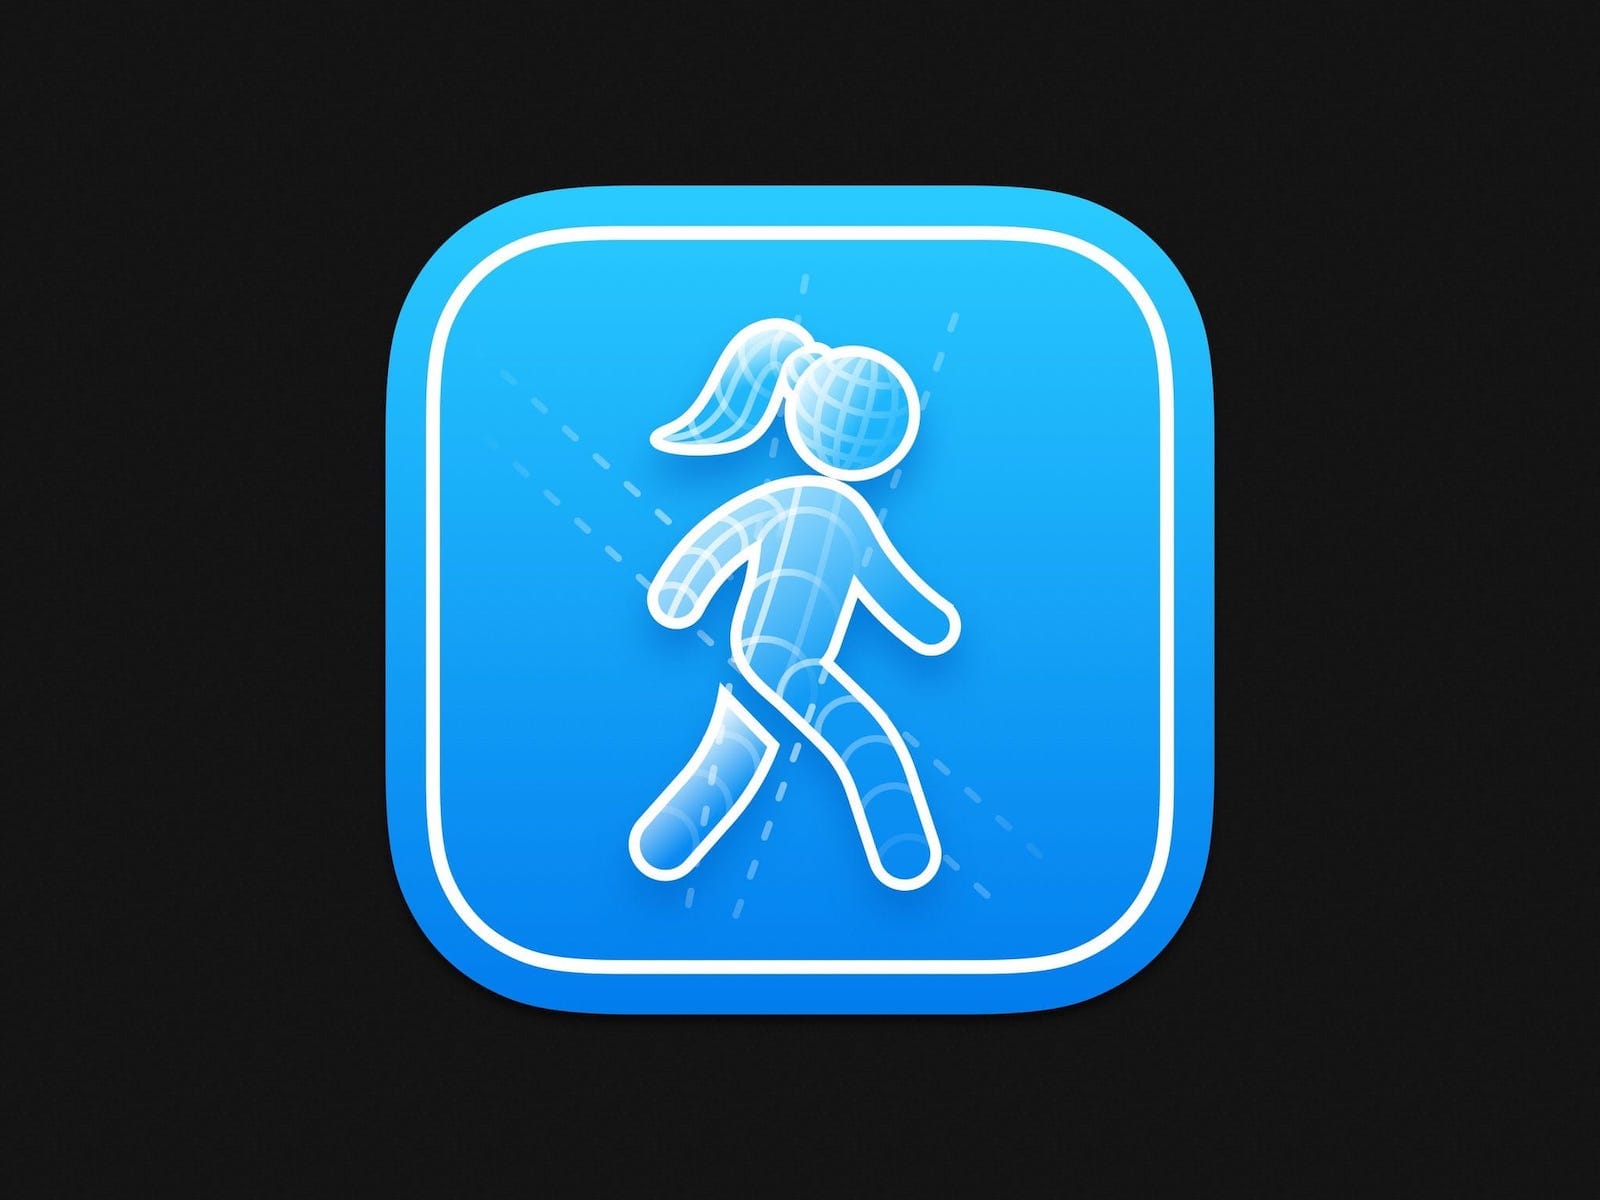 Blueprint-style icon with the outline of a woman walking in the middle.